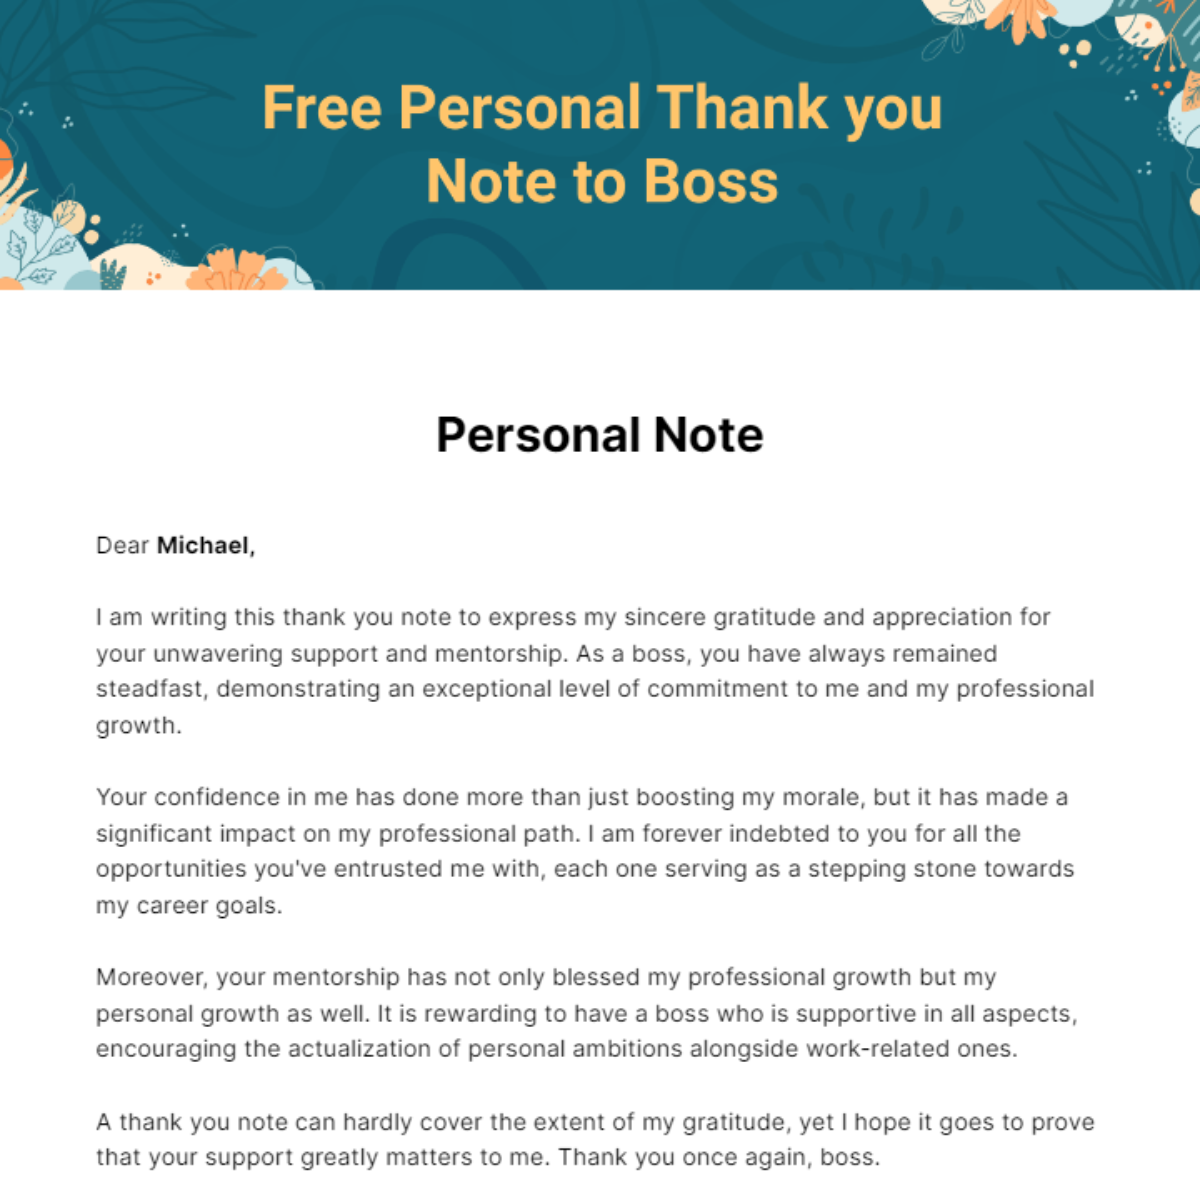 Free Personal Thank you Note to Boss Template